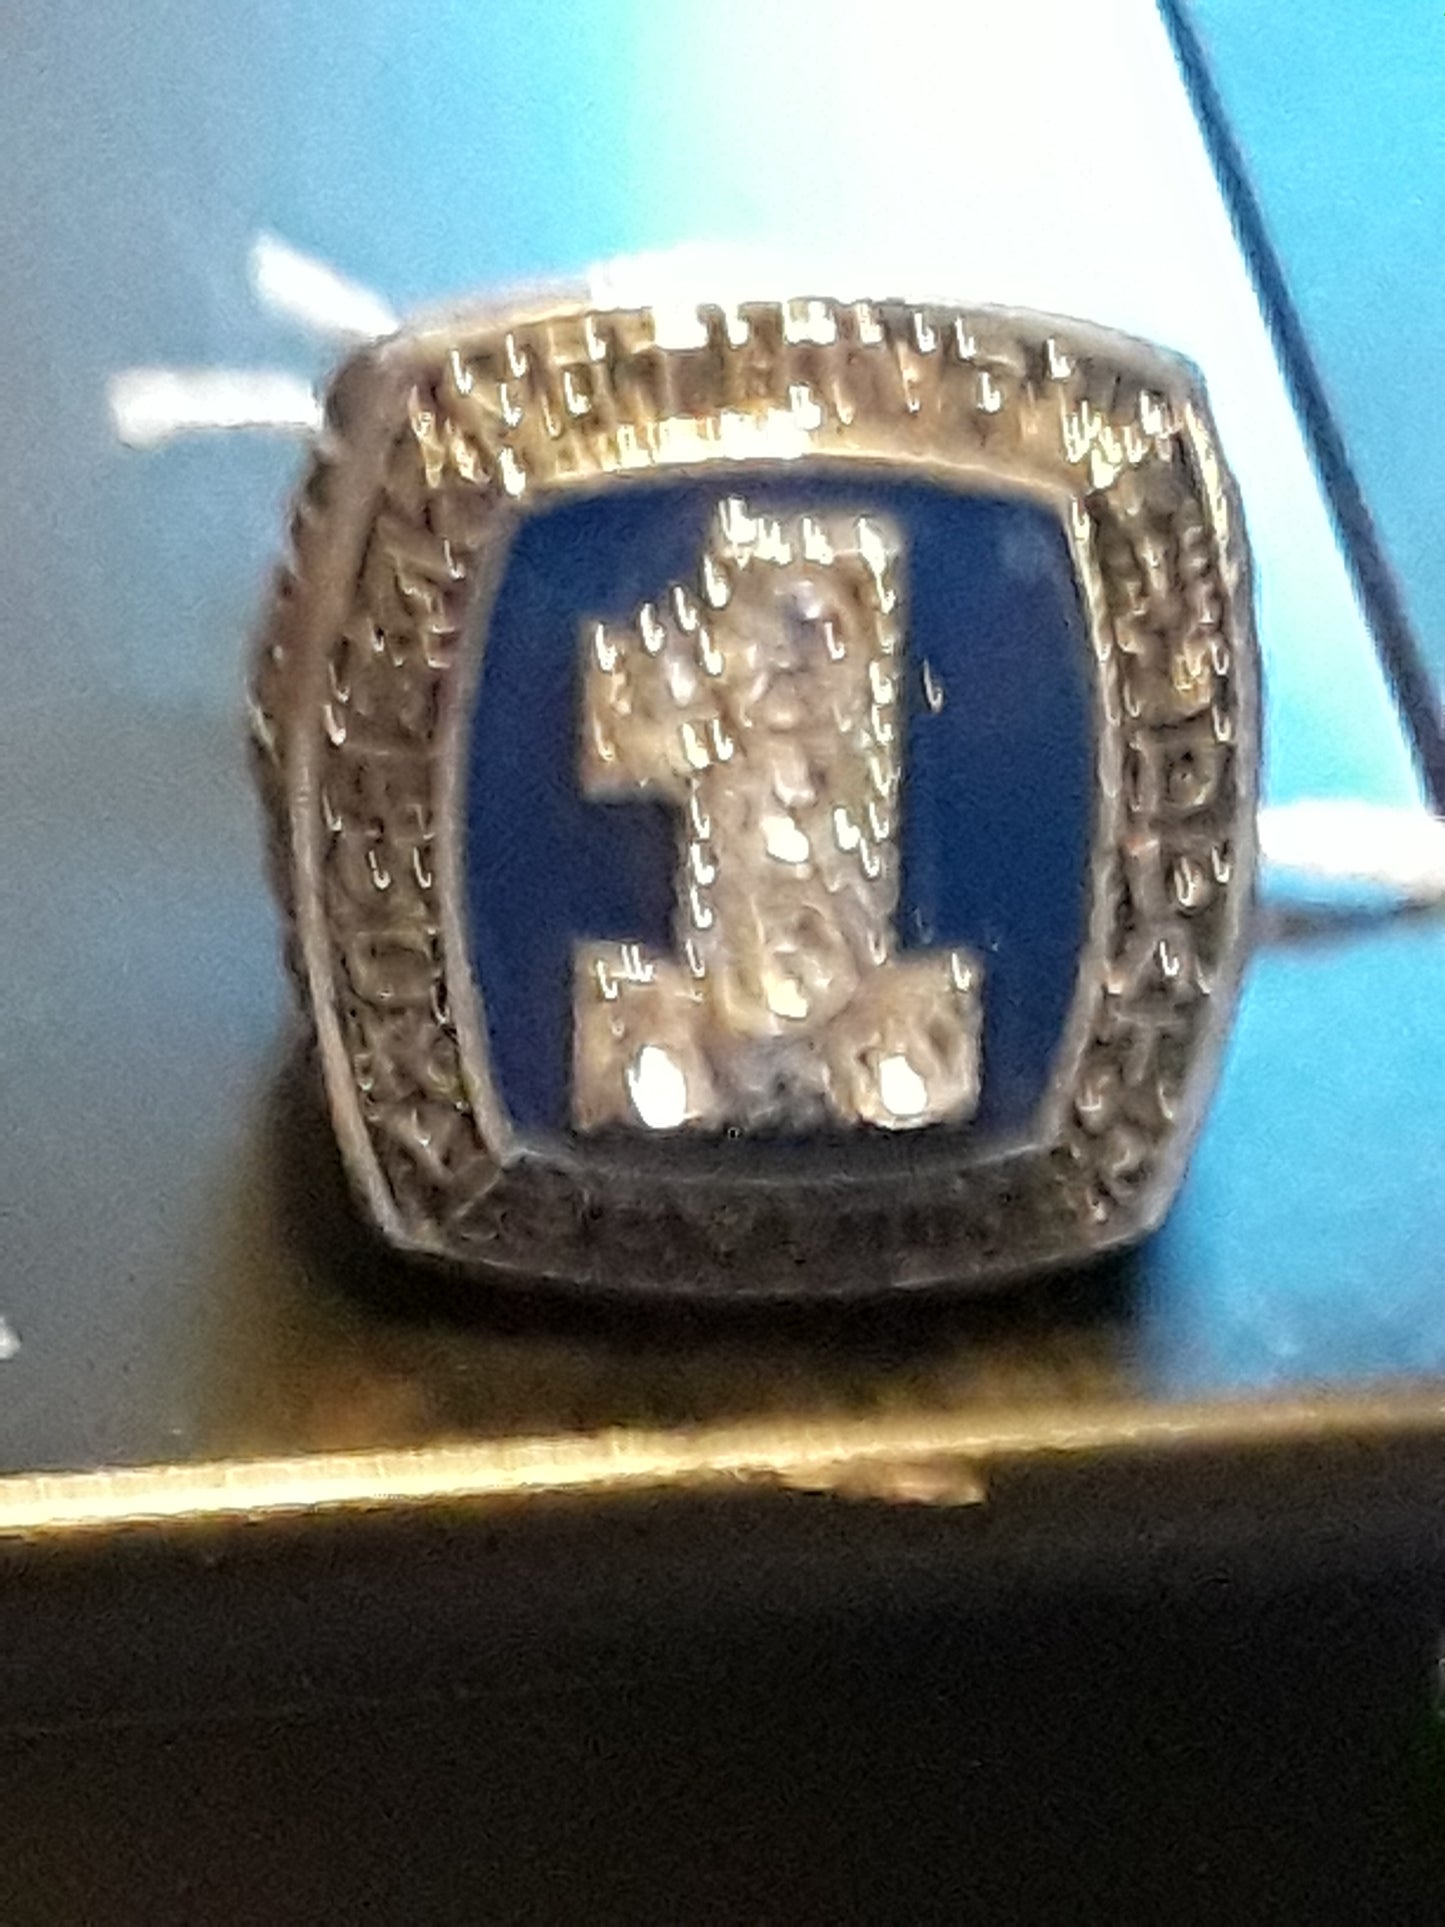 KY WILDCATS 1996 NCAA RING